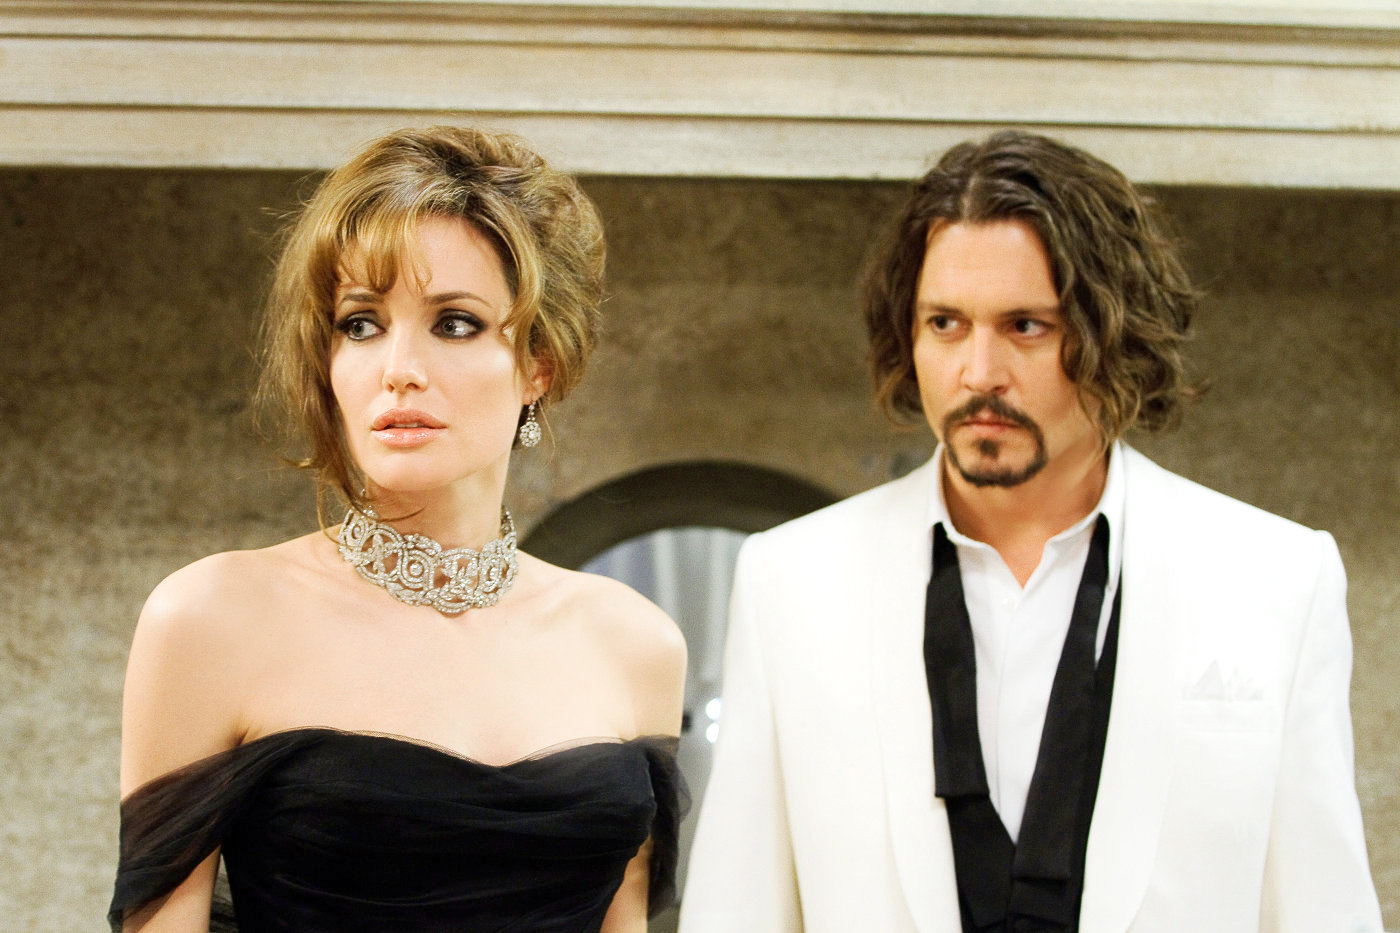 Angelina Jolie stars as Elise and Johnny Depp stars as Frank Taylor in Columbia Pictures' The Tourist (2010)